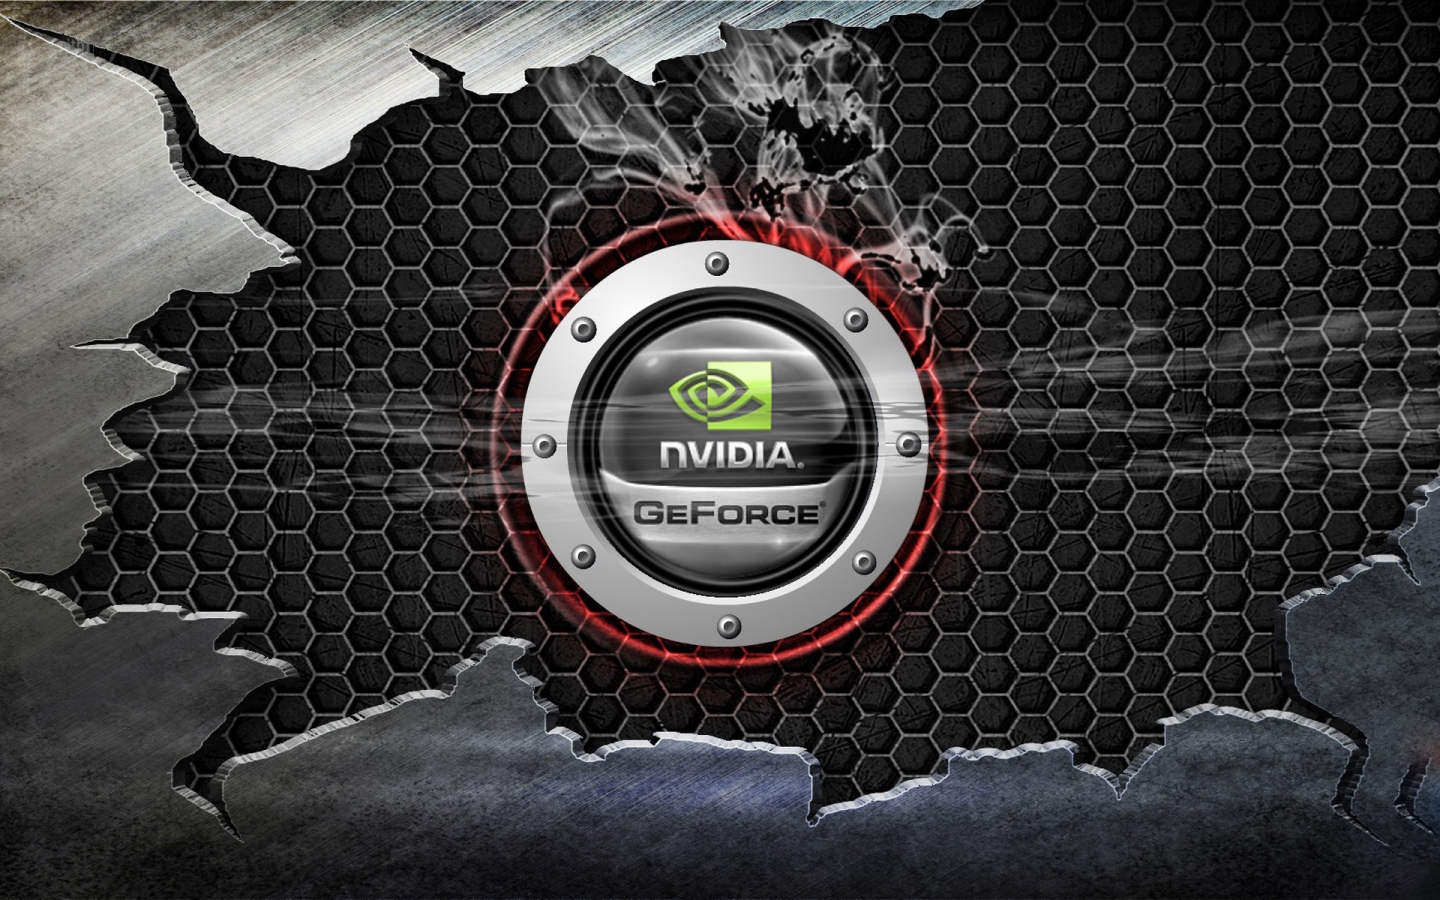 nVIDIA for 1440 x 900 widescreen resolution